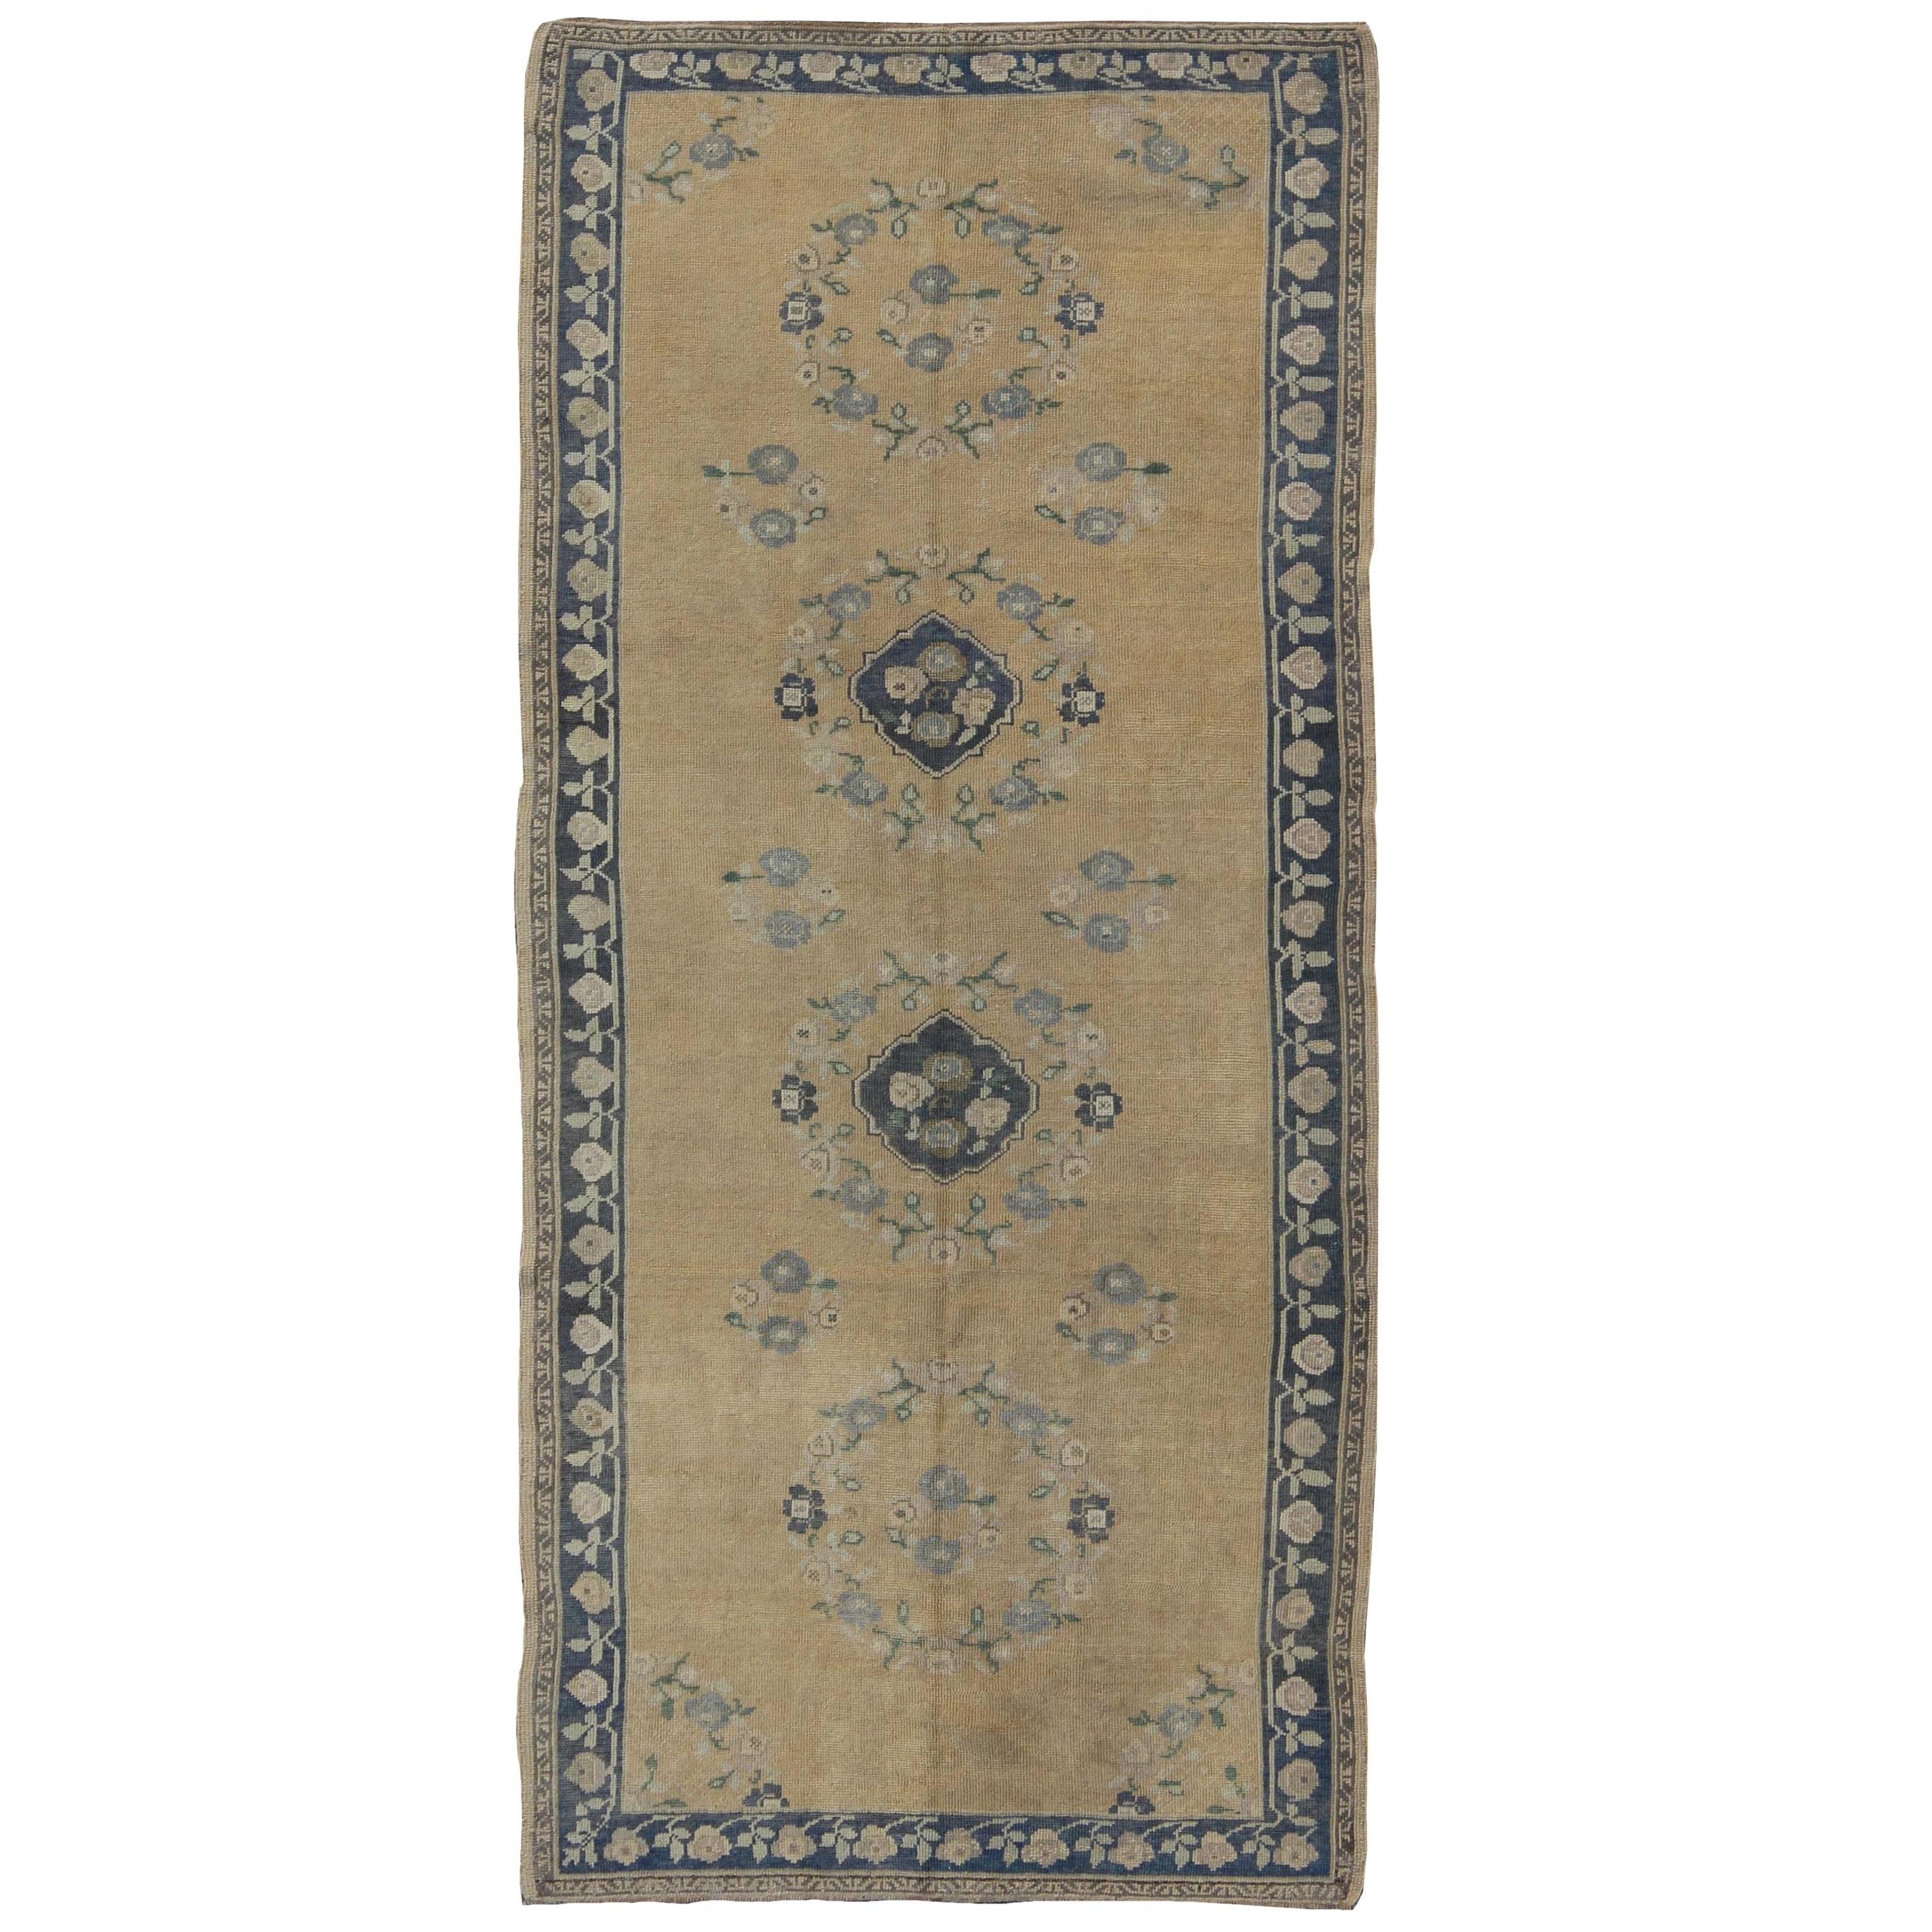 Oushak Gallery Rug from Mid-20th Century Turkey with Floral Design